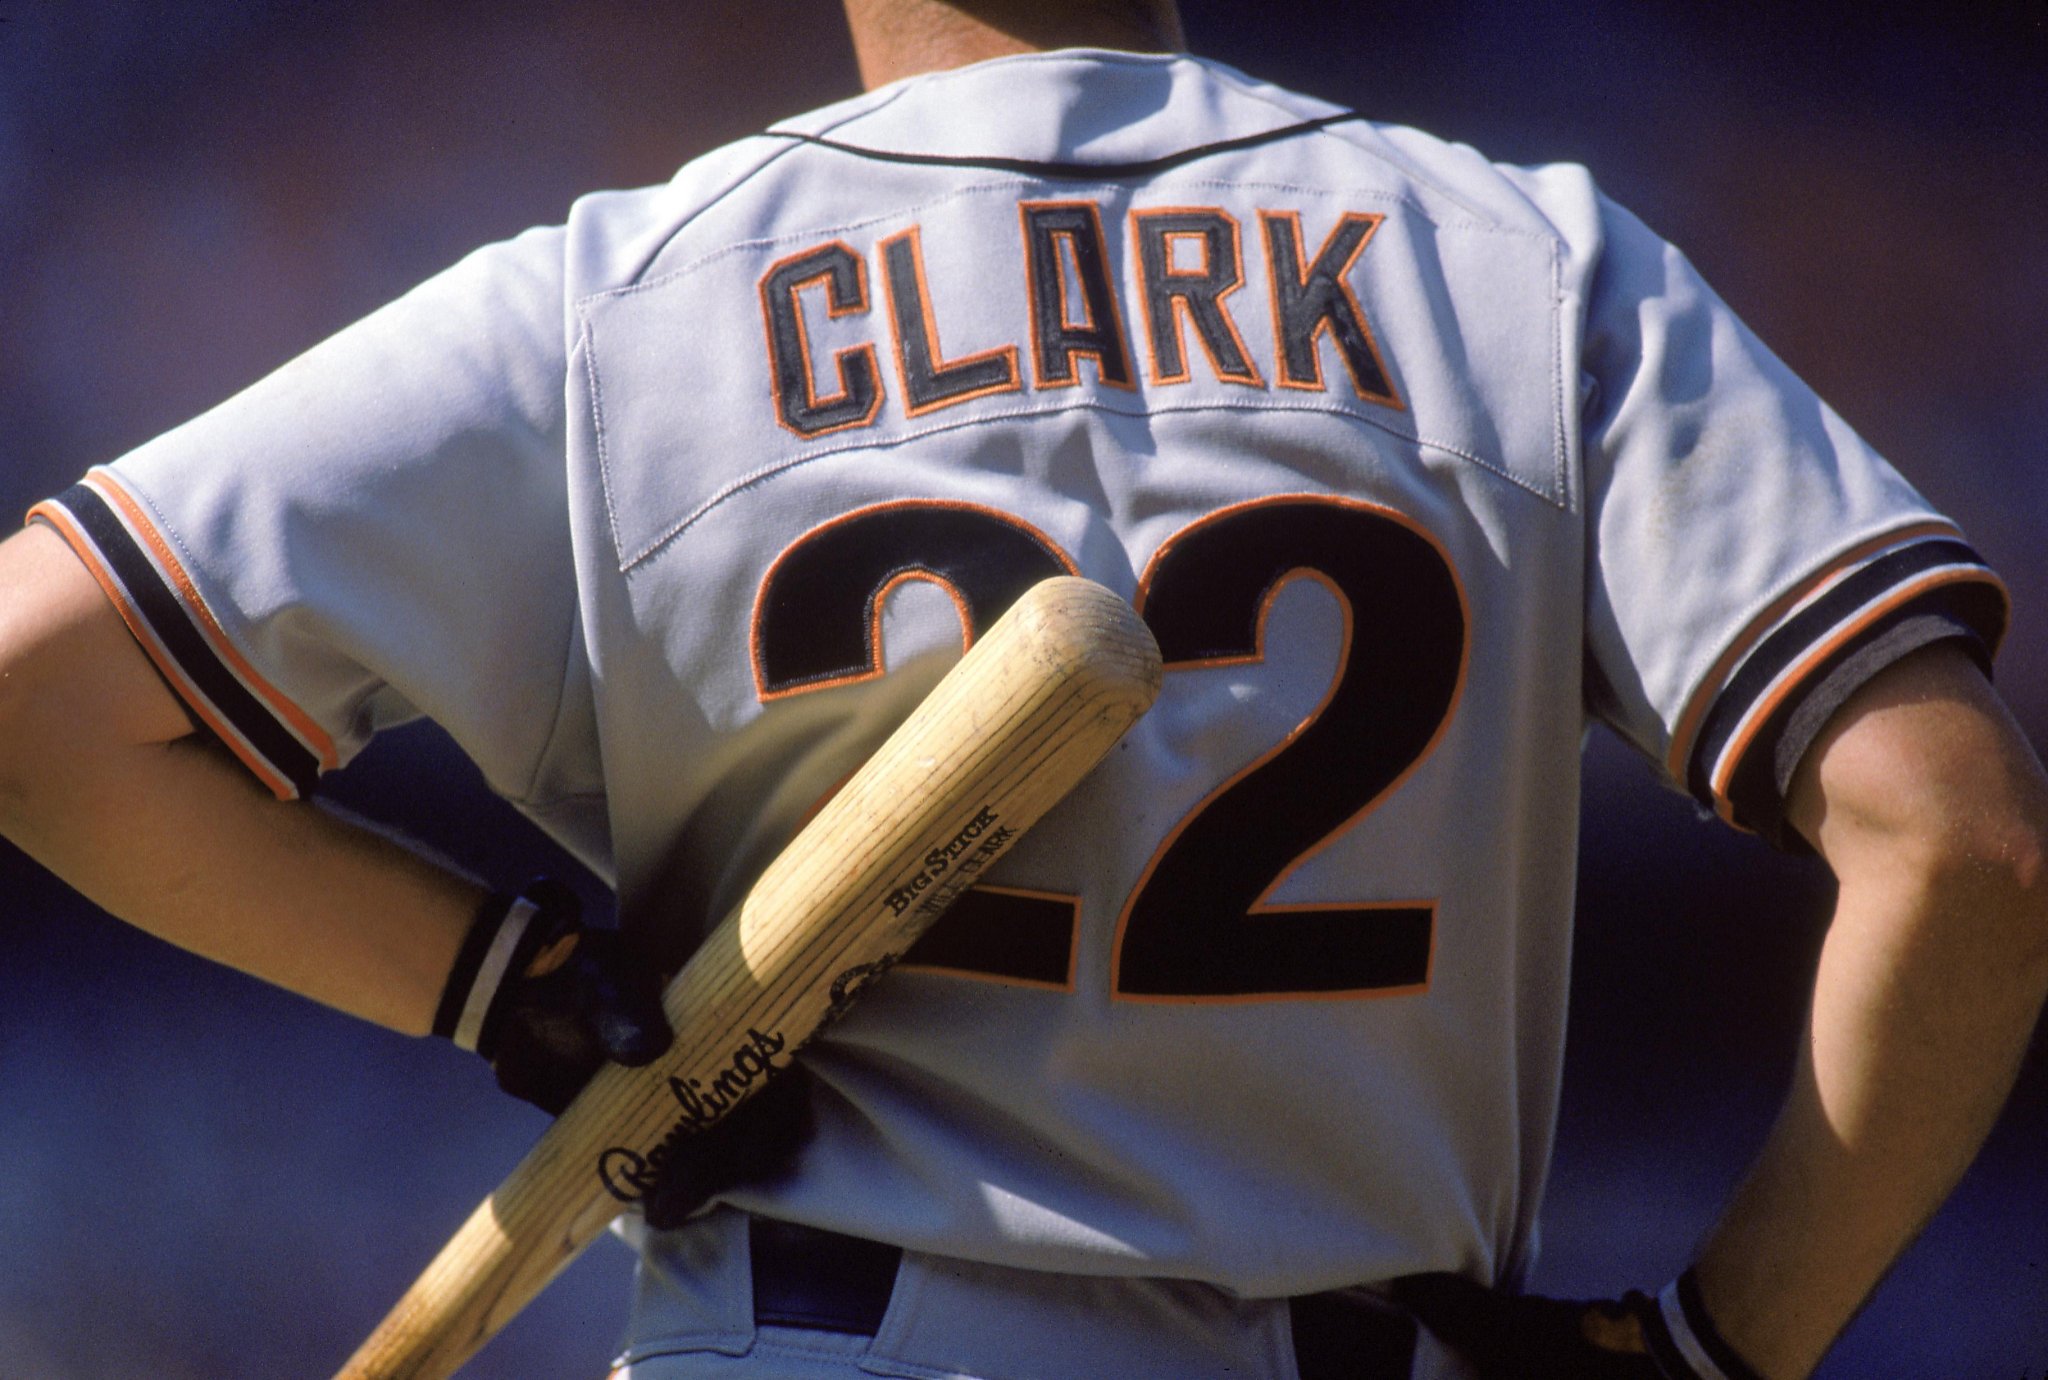 will clark jersey number